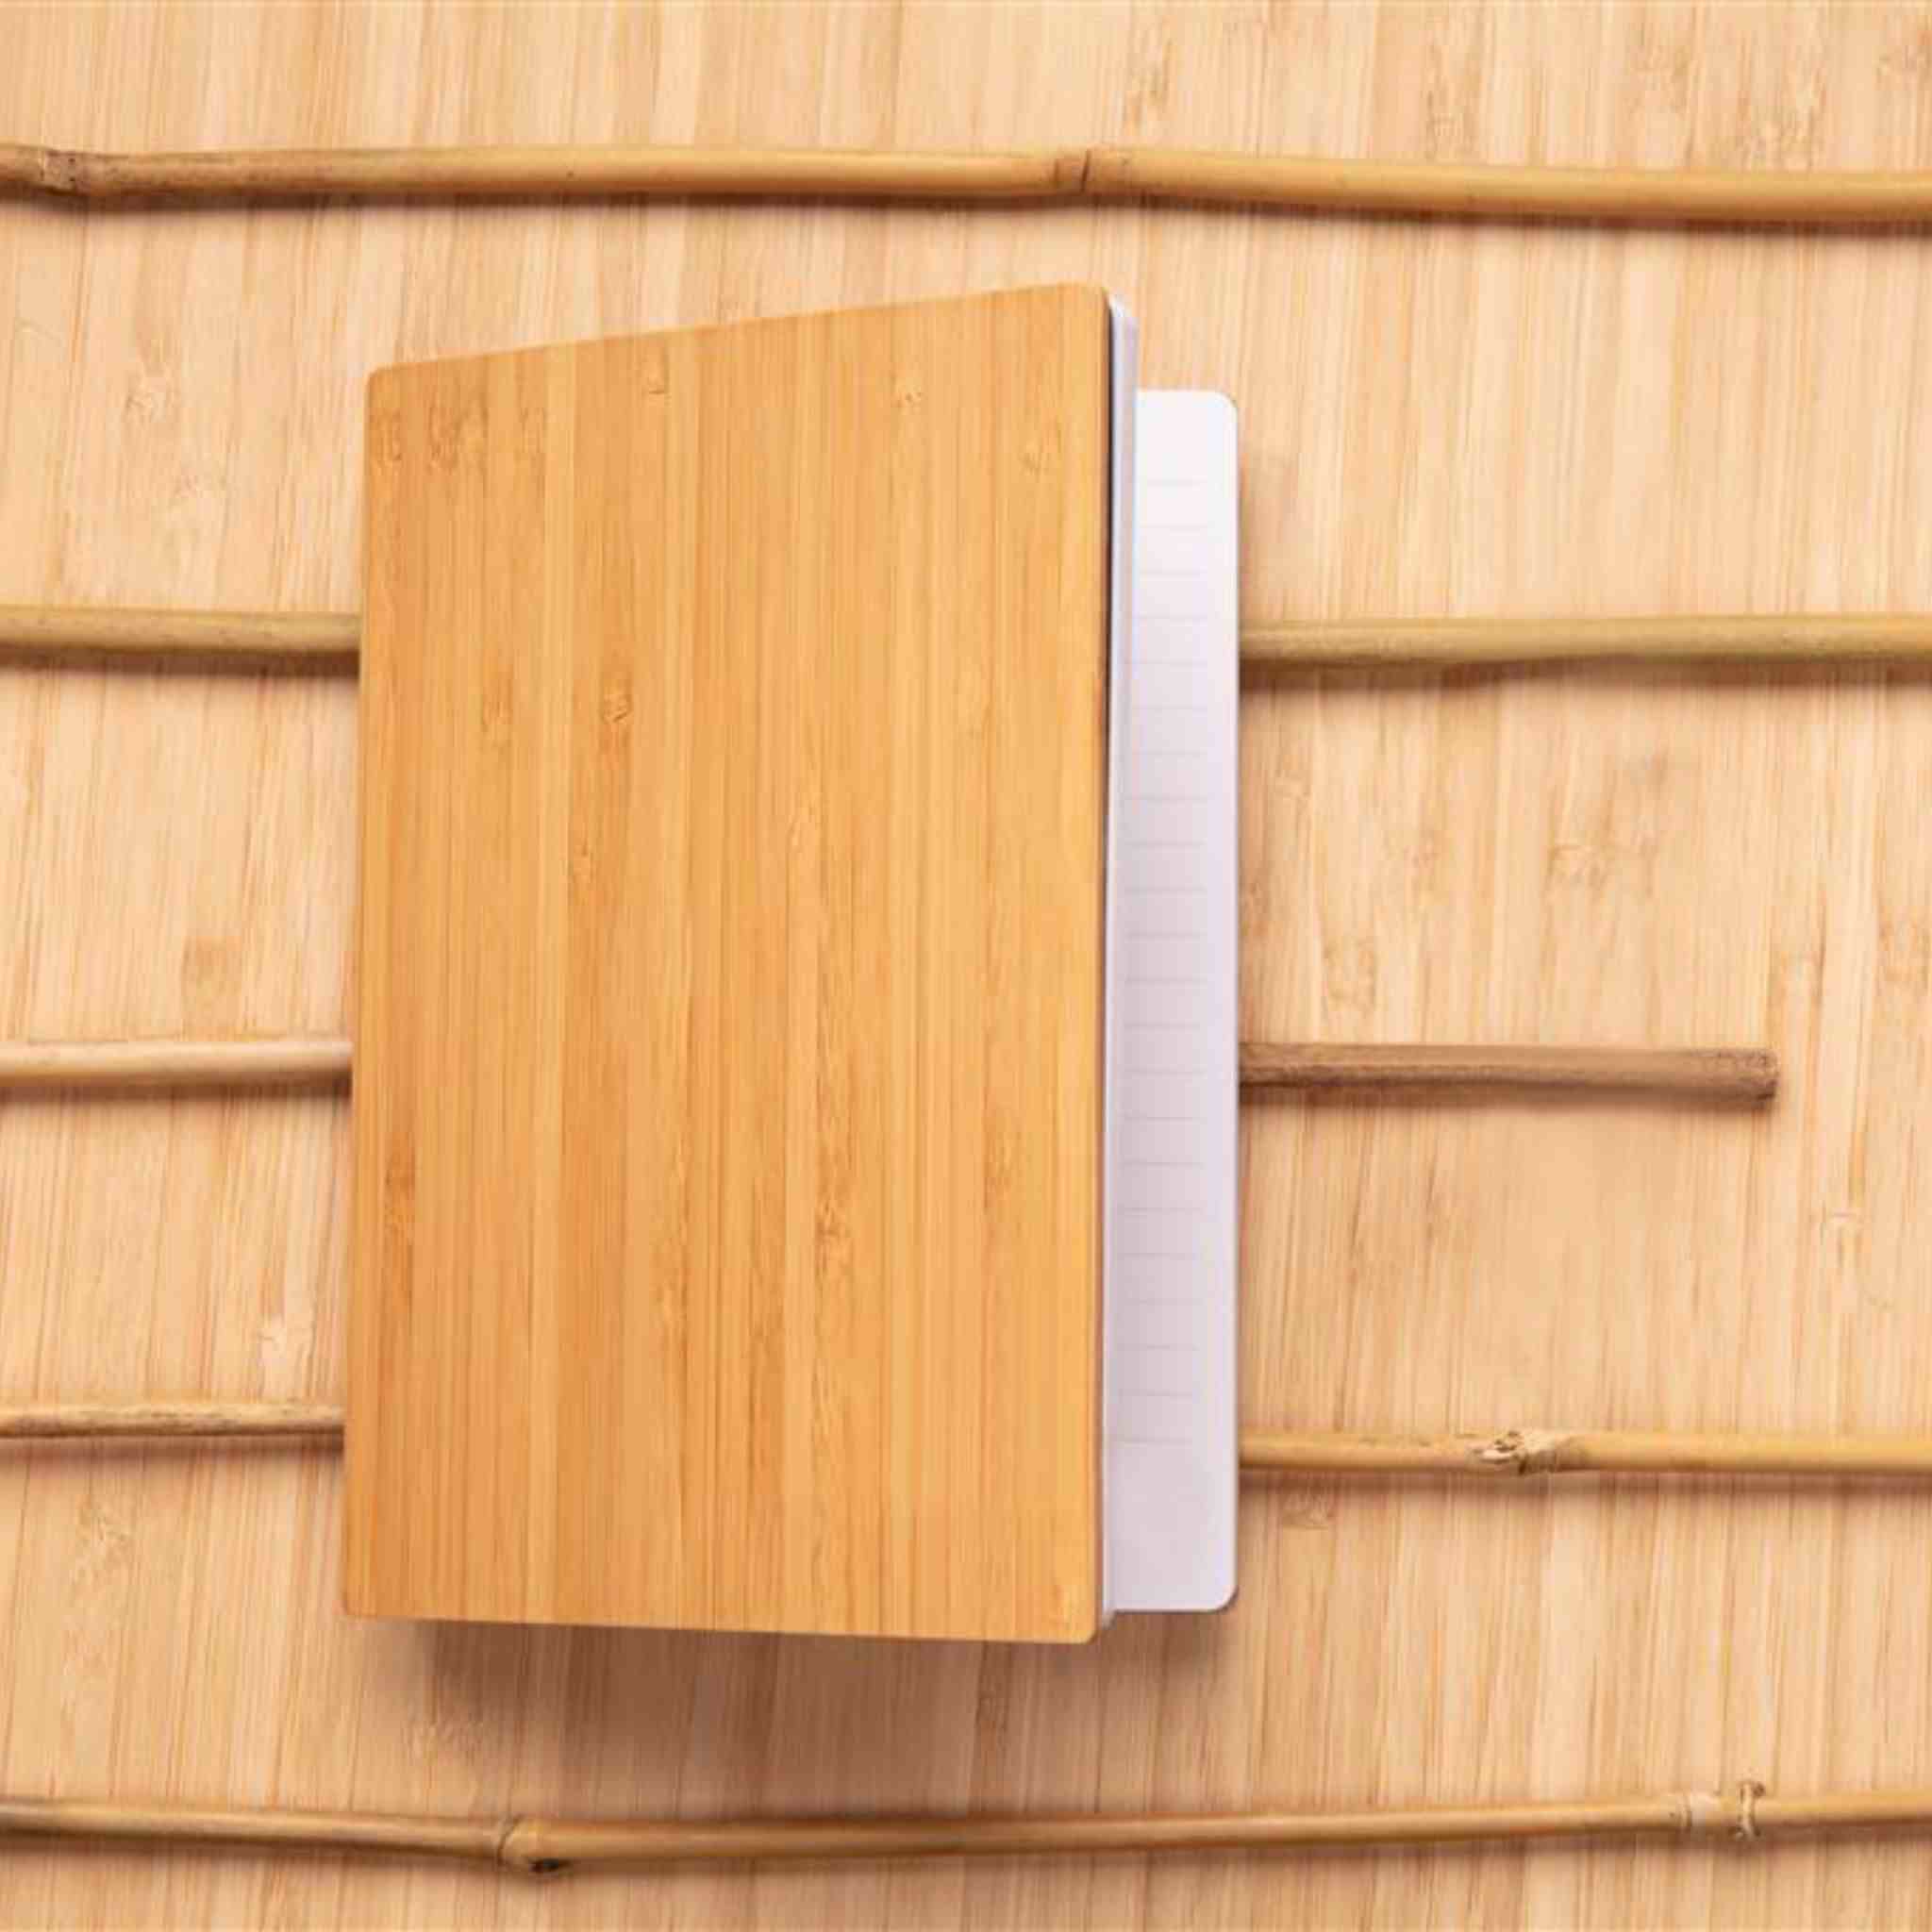 Slightly Bamboo notebook on a surface